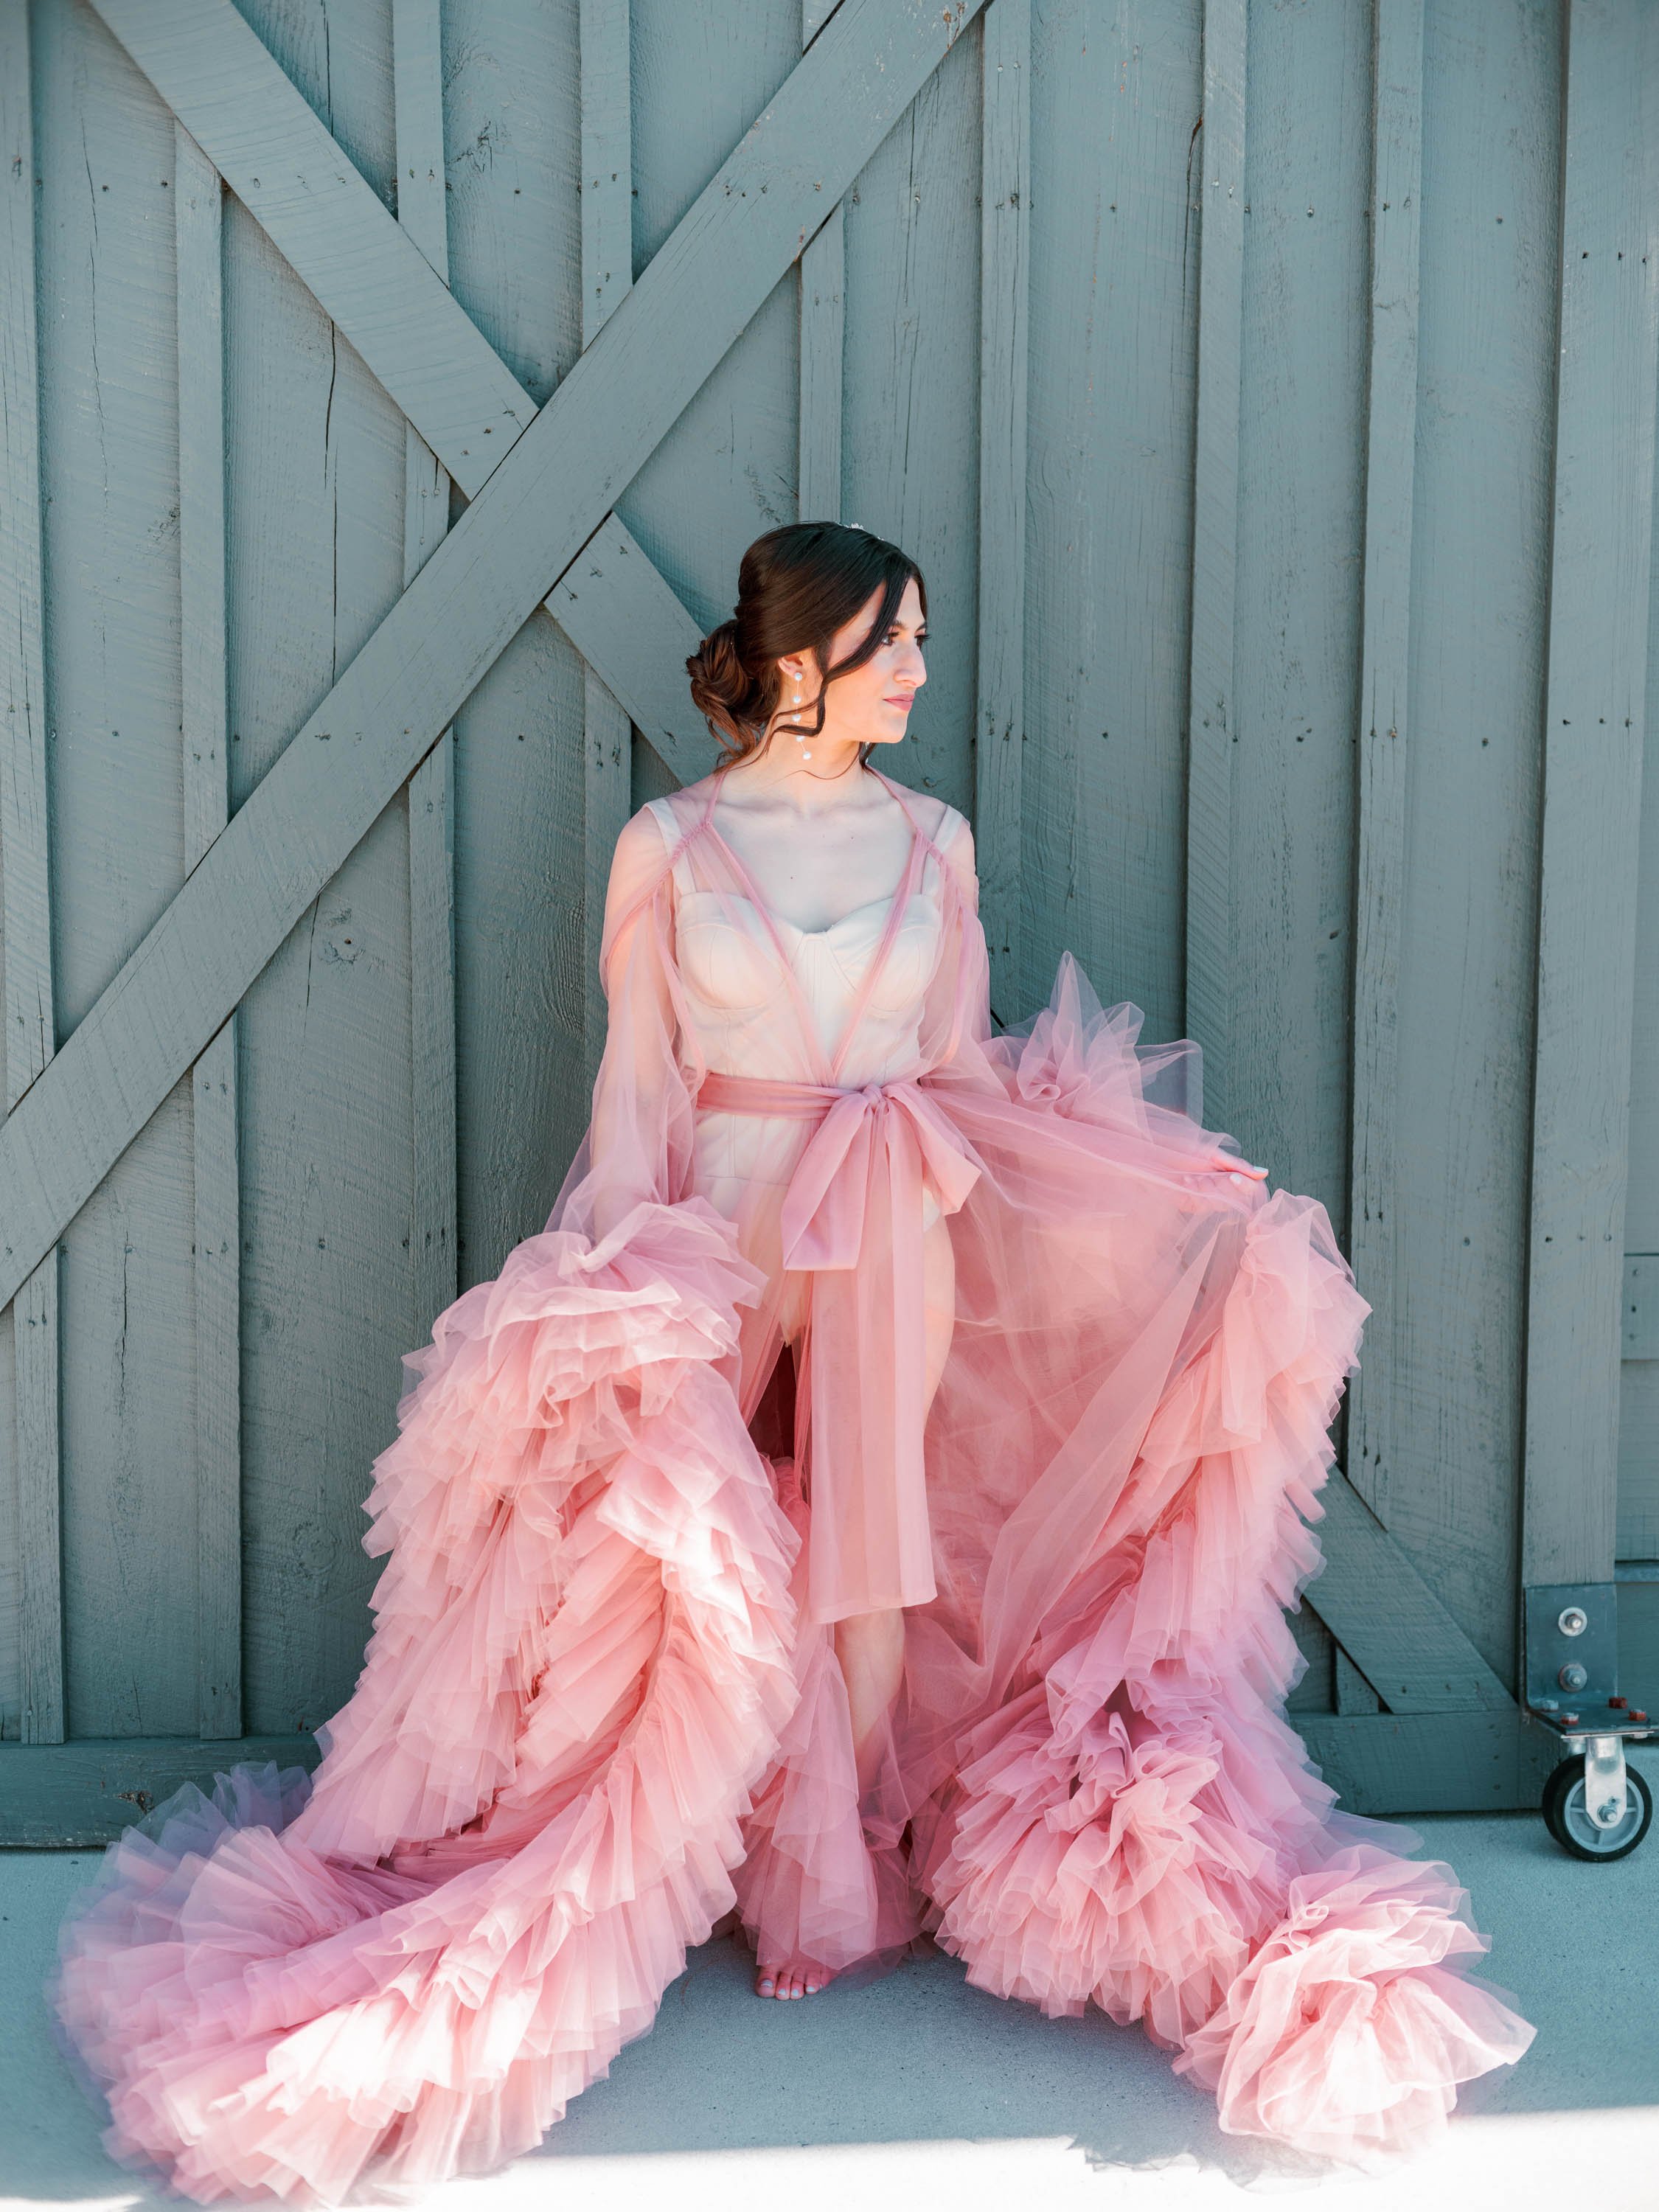  A bride standing in front of a blue barn door wearing a sheer pink tulle bridal robe with full cascading ruffles. Her hair is dark brown and styled back in a low chignon with tendrils curled around her face, and tiered pearl drop earrings as she loo